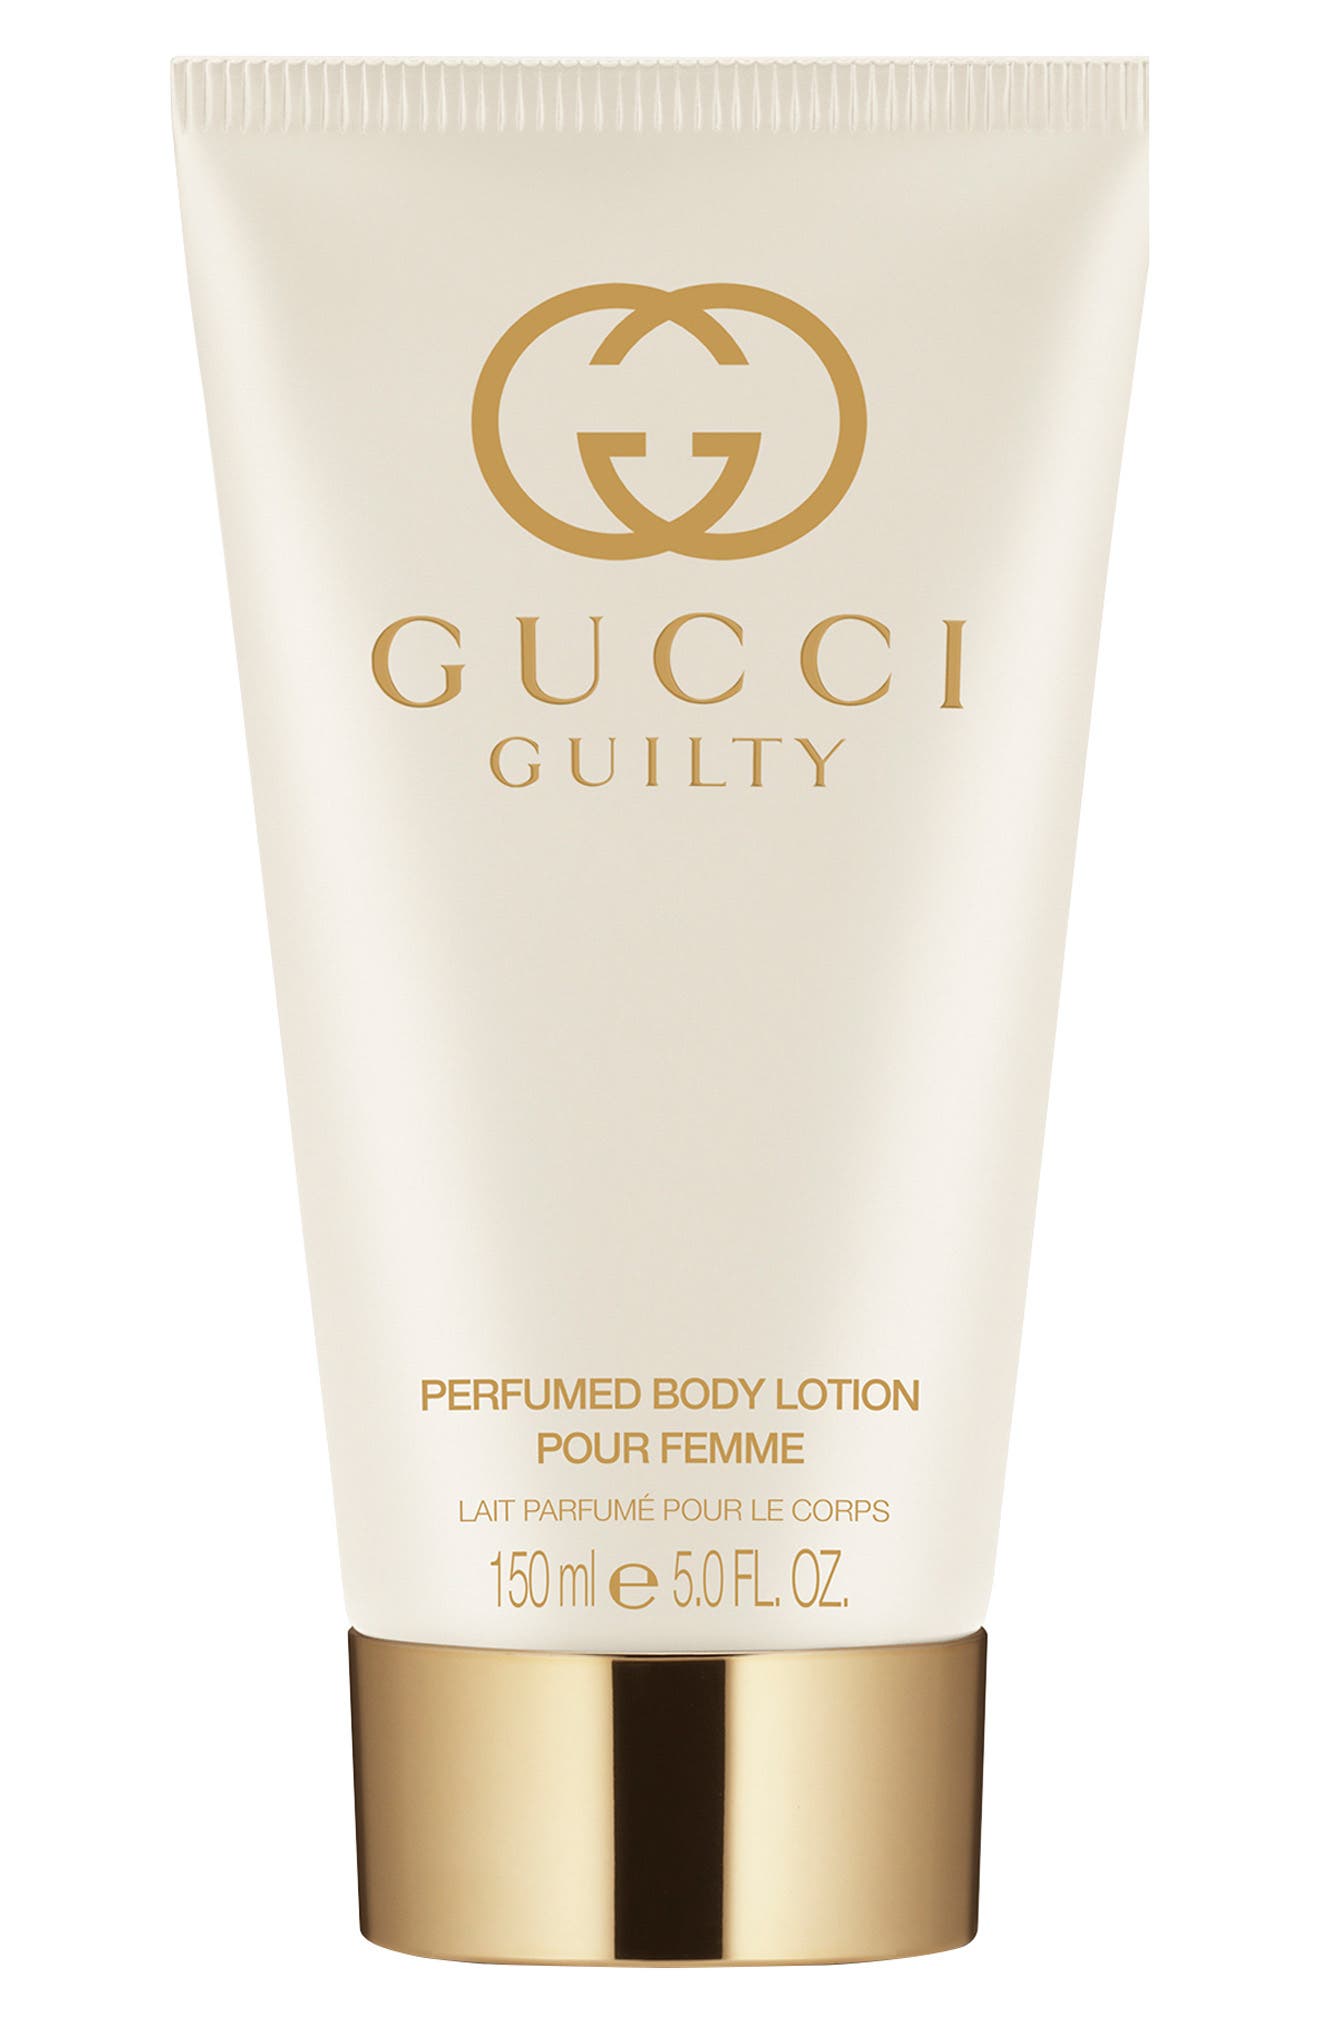 EAN 3614227758360 product image for Gucci Guilty Pour Femme Body Lotion, Size - One Size | upcitemdb.com